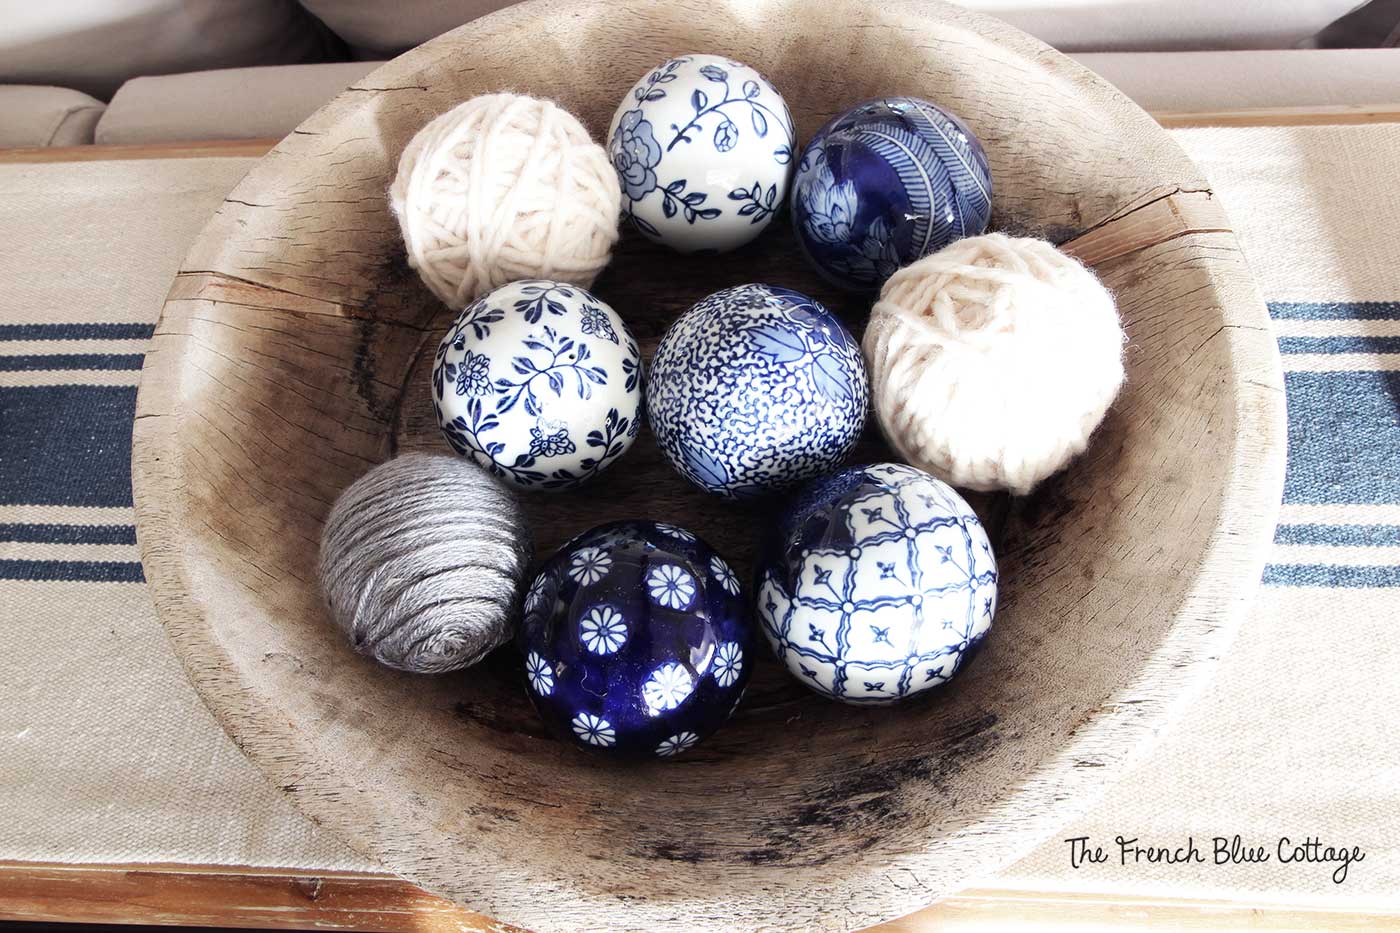 Yarn and ceramic balls in a rustic bowl.